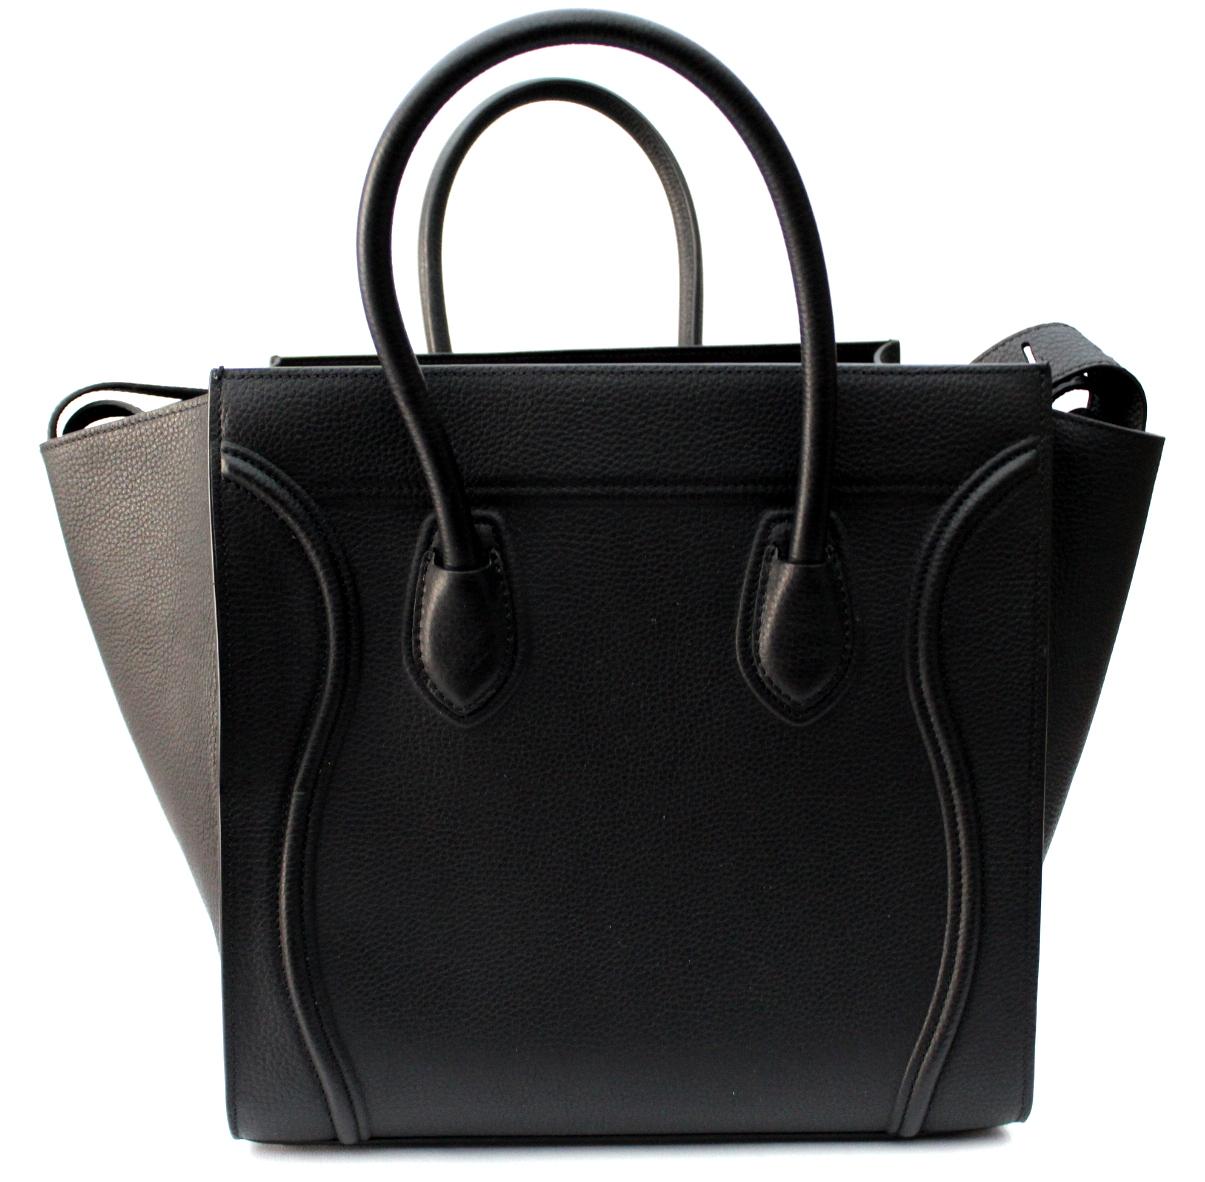 The Celine Luggage bag is one of the most sought-after bags by fashionistas. Characterized by a casual but luxurious style, it is simple and distinctive with its sturdy handles and detailed stitching. This Mini bag is equipped with upper handles,